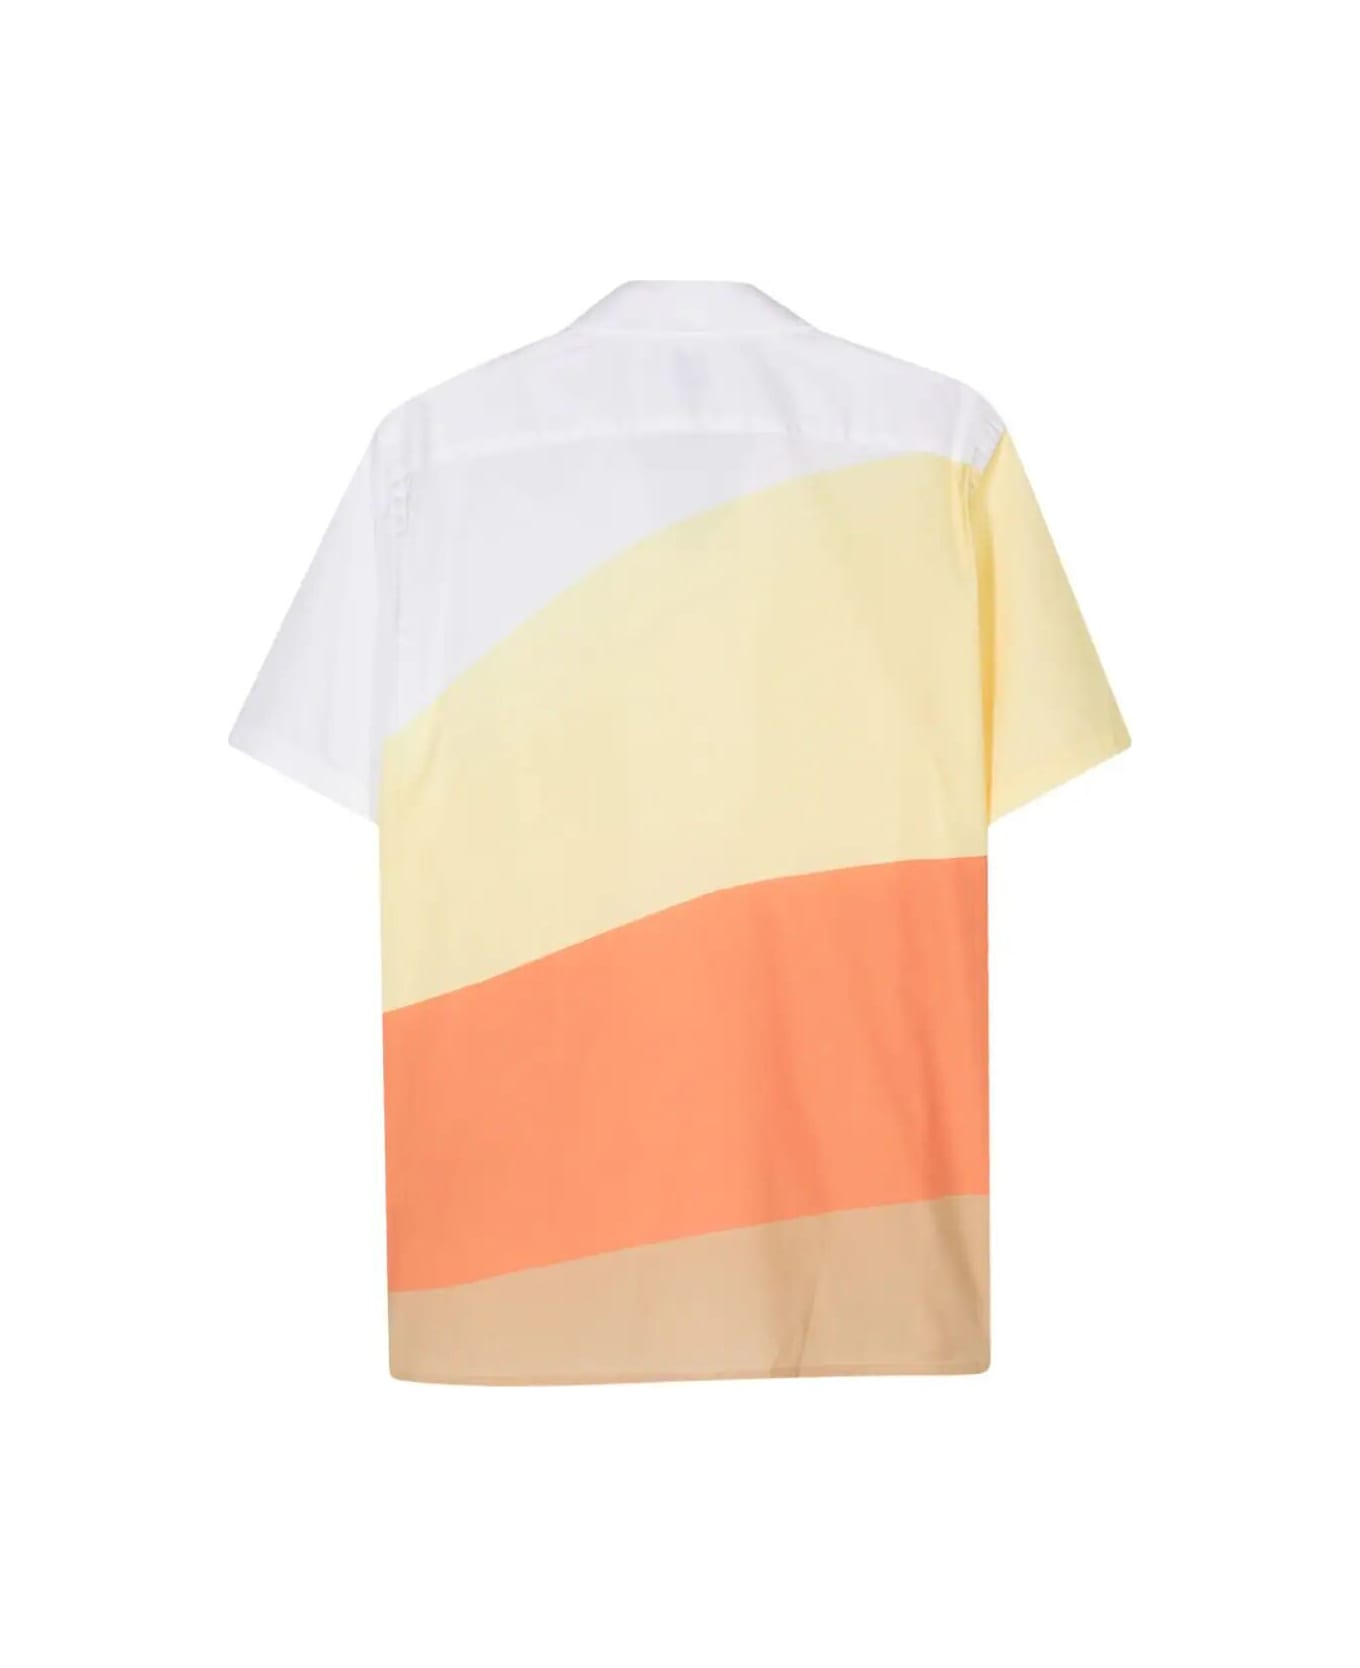 PS by Paul Smith Mens Ss Casual Fit Shirt - Yellows シャツ